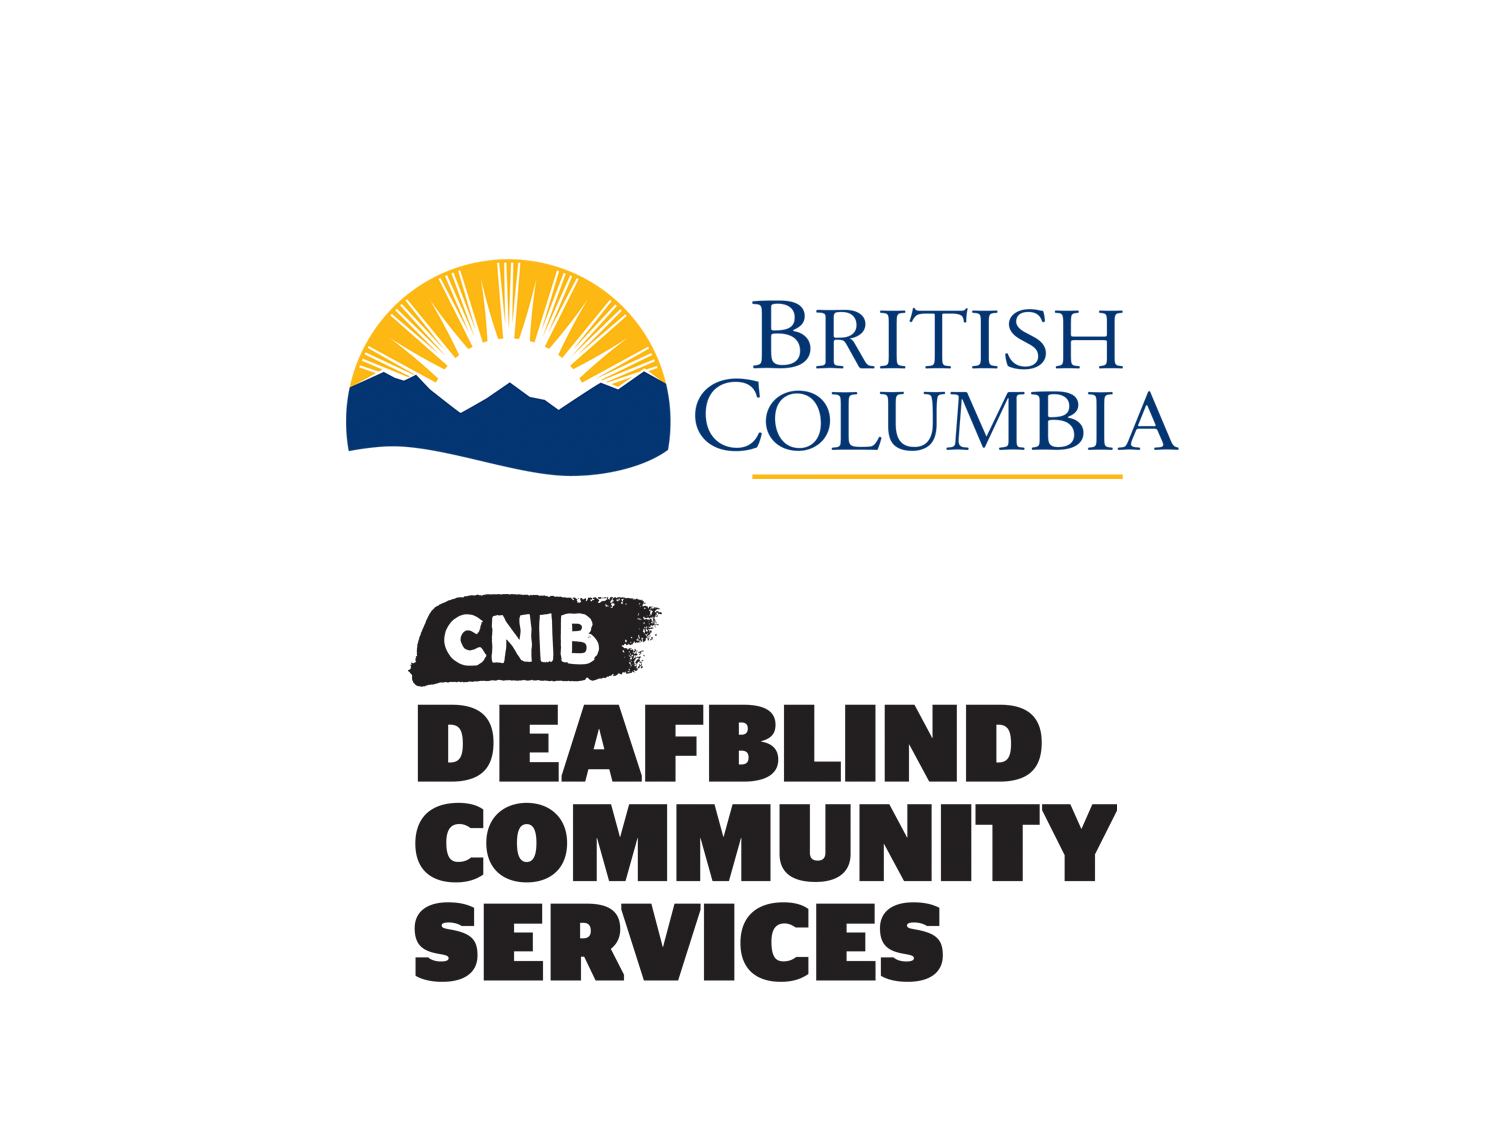 The Government of British Columbia logo and the DBCS logo 